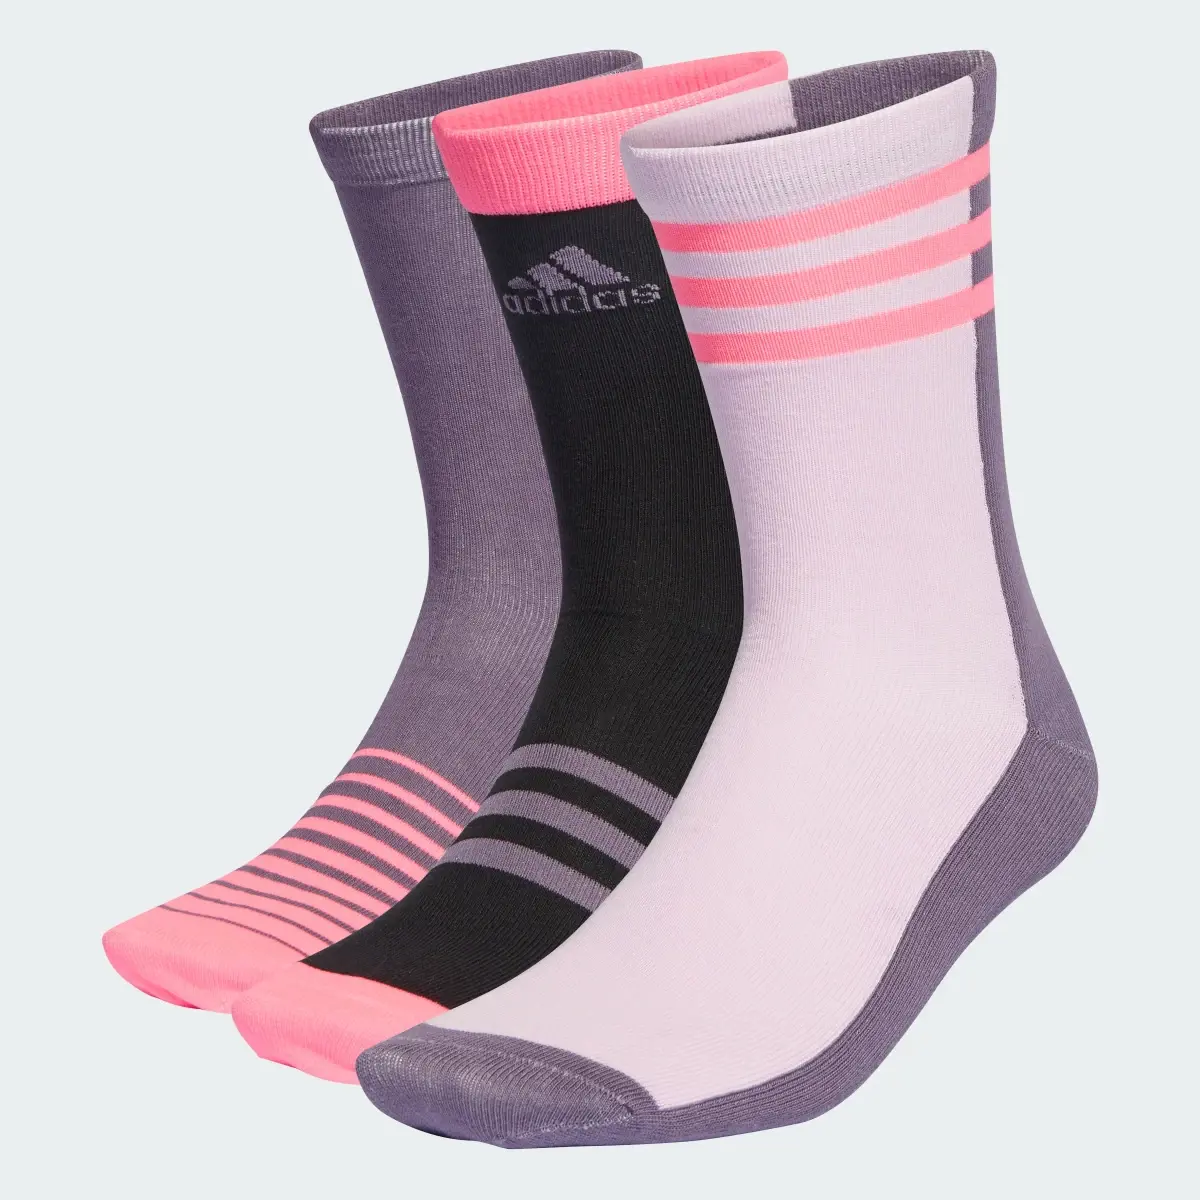 Adidas Chaussettes mi-mollet International Girls Day (3 paires). 1